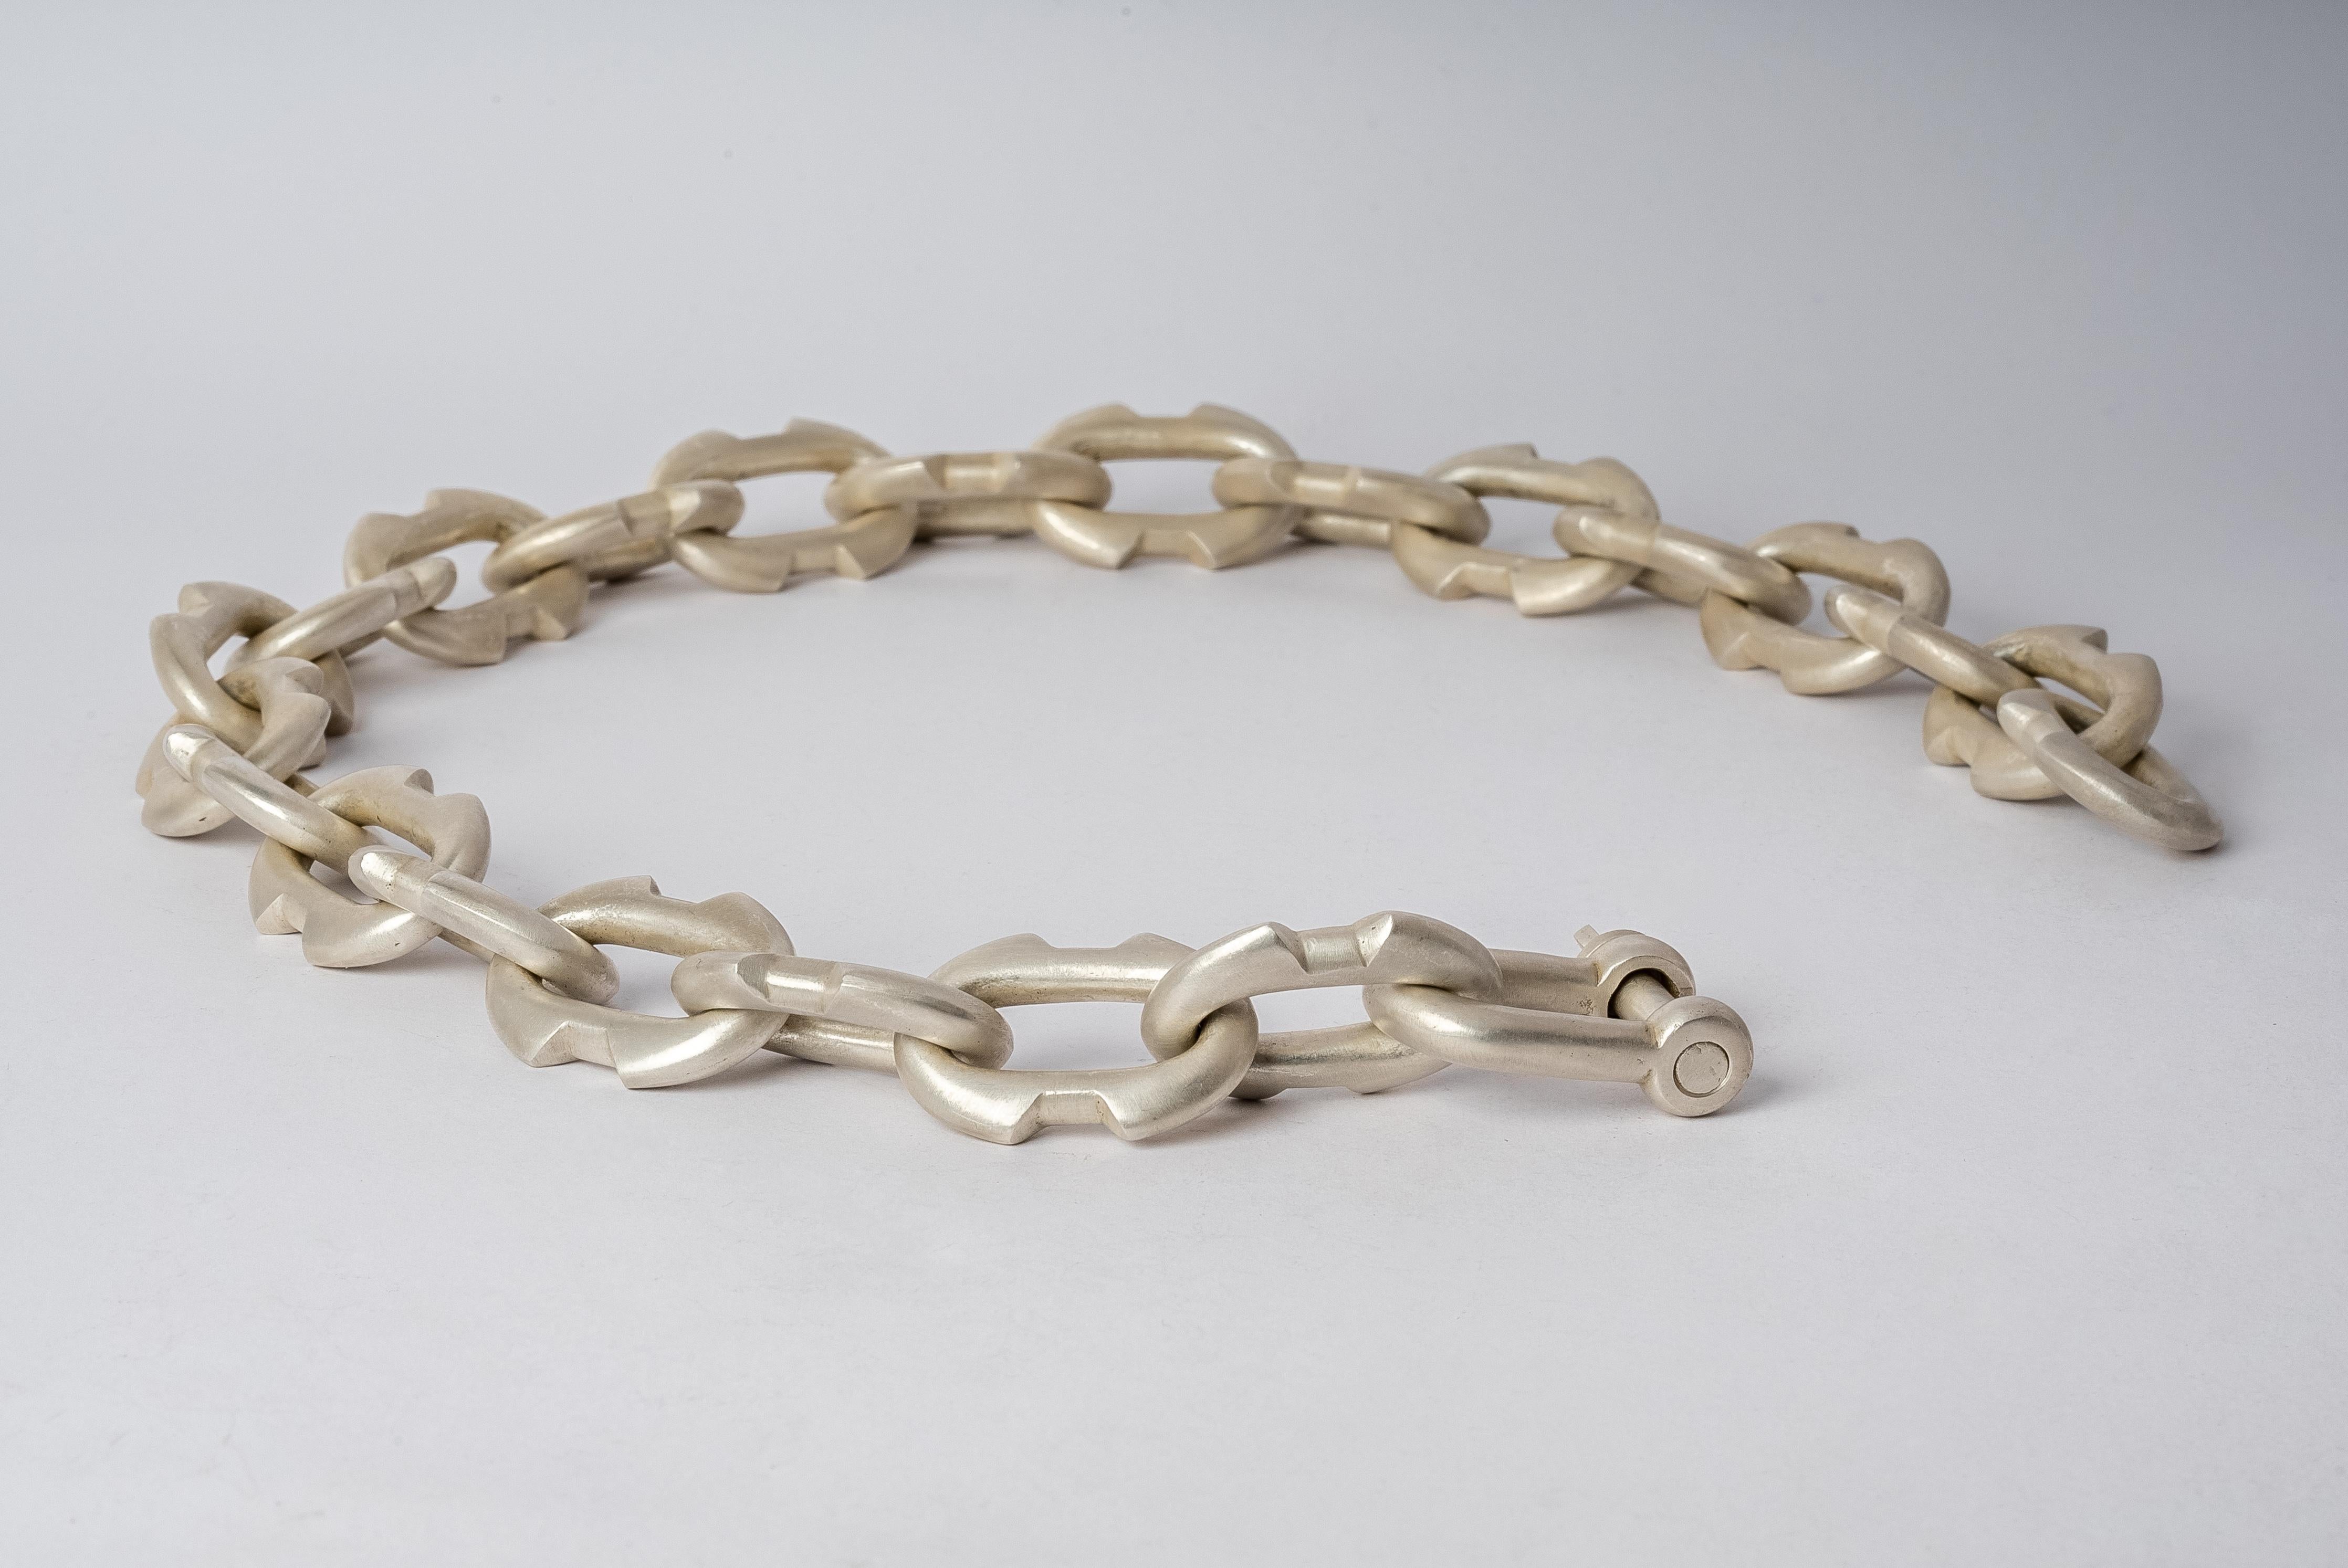 Charm chain necklace in brass. Brass substrate is electroplated with silver and then dipped into acid to create the subtly destroyed surface. 
The Charm System is an interrelated group of products that can be mixed and matched or worn